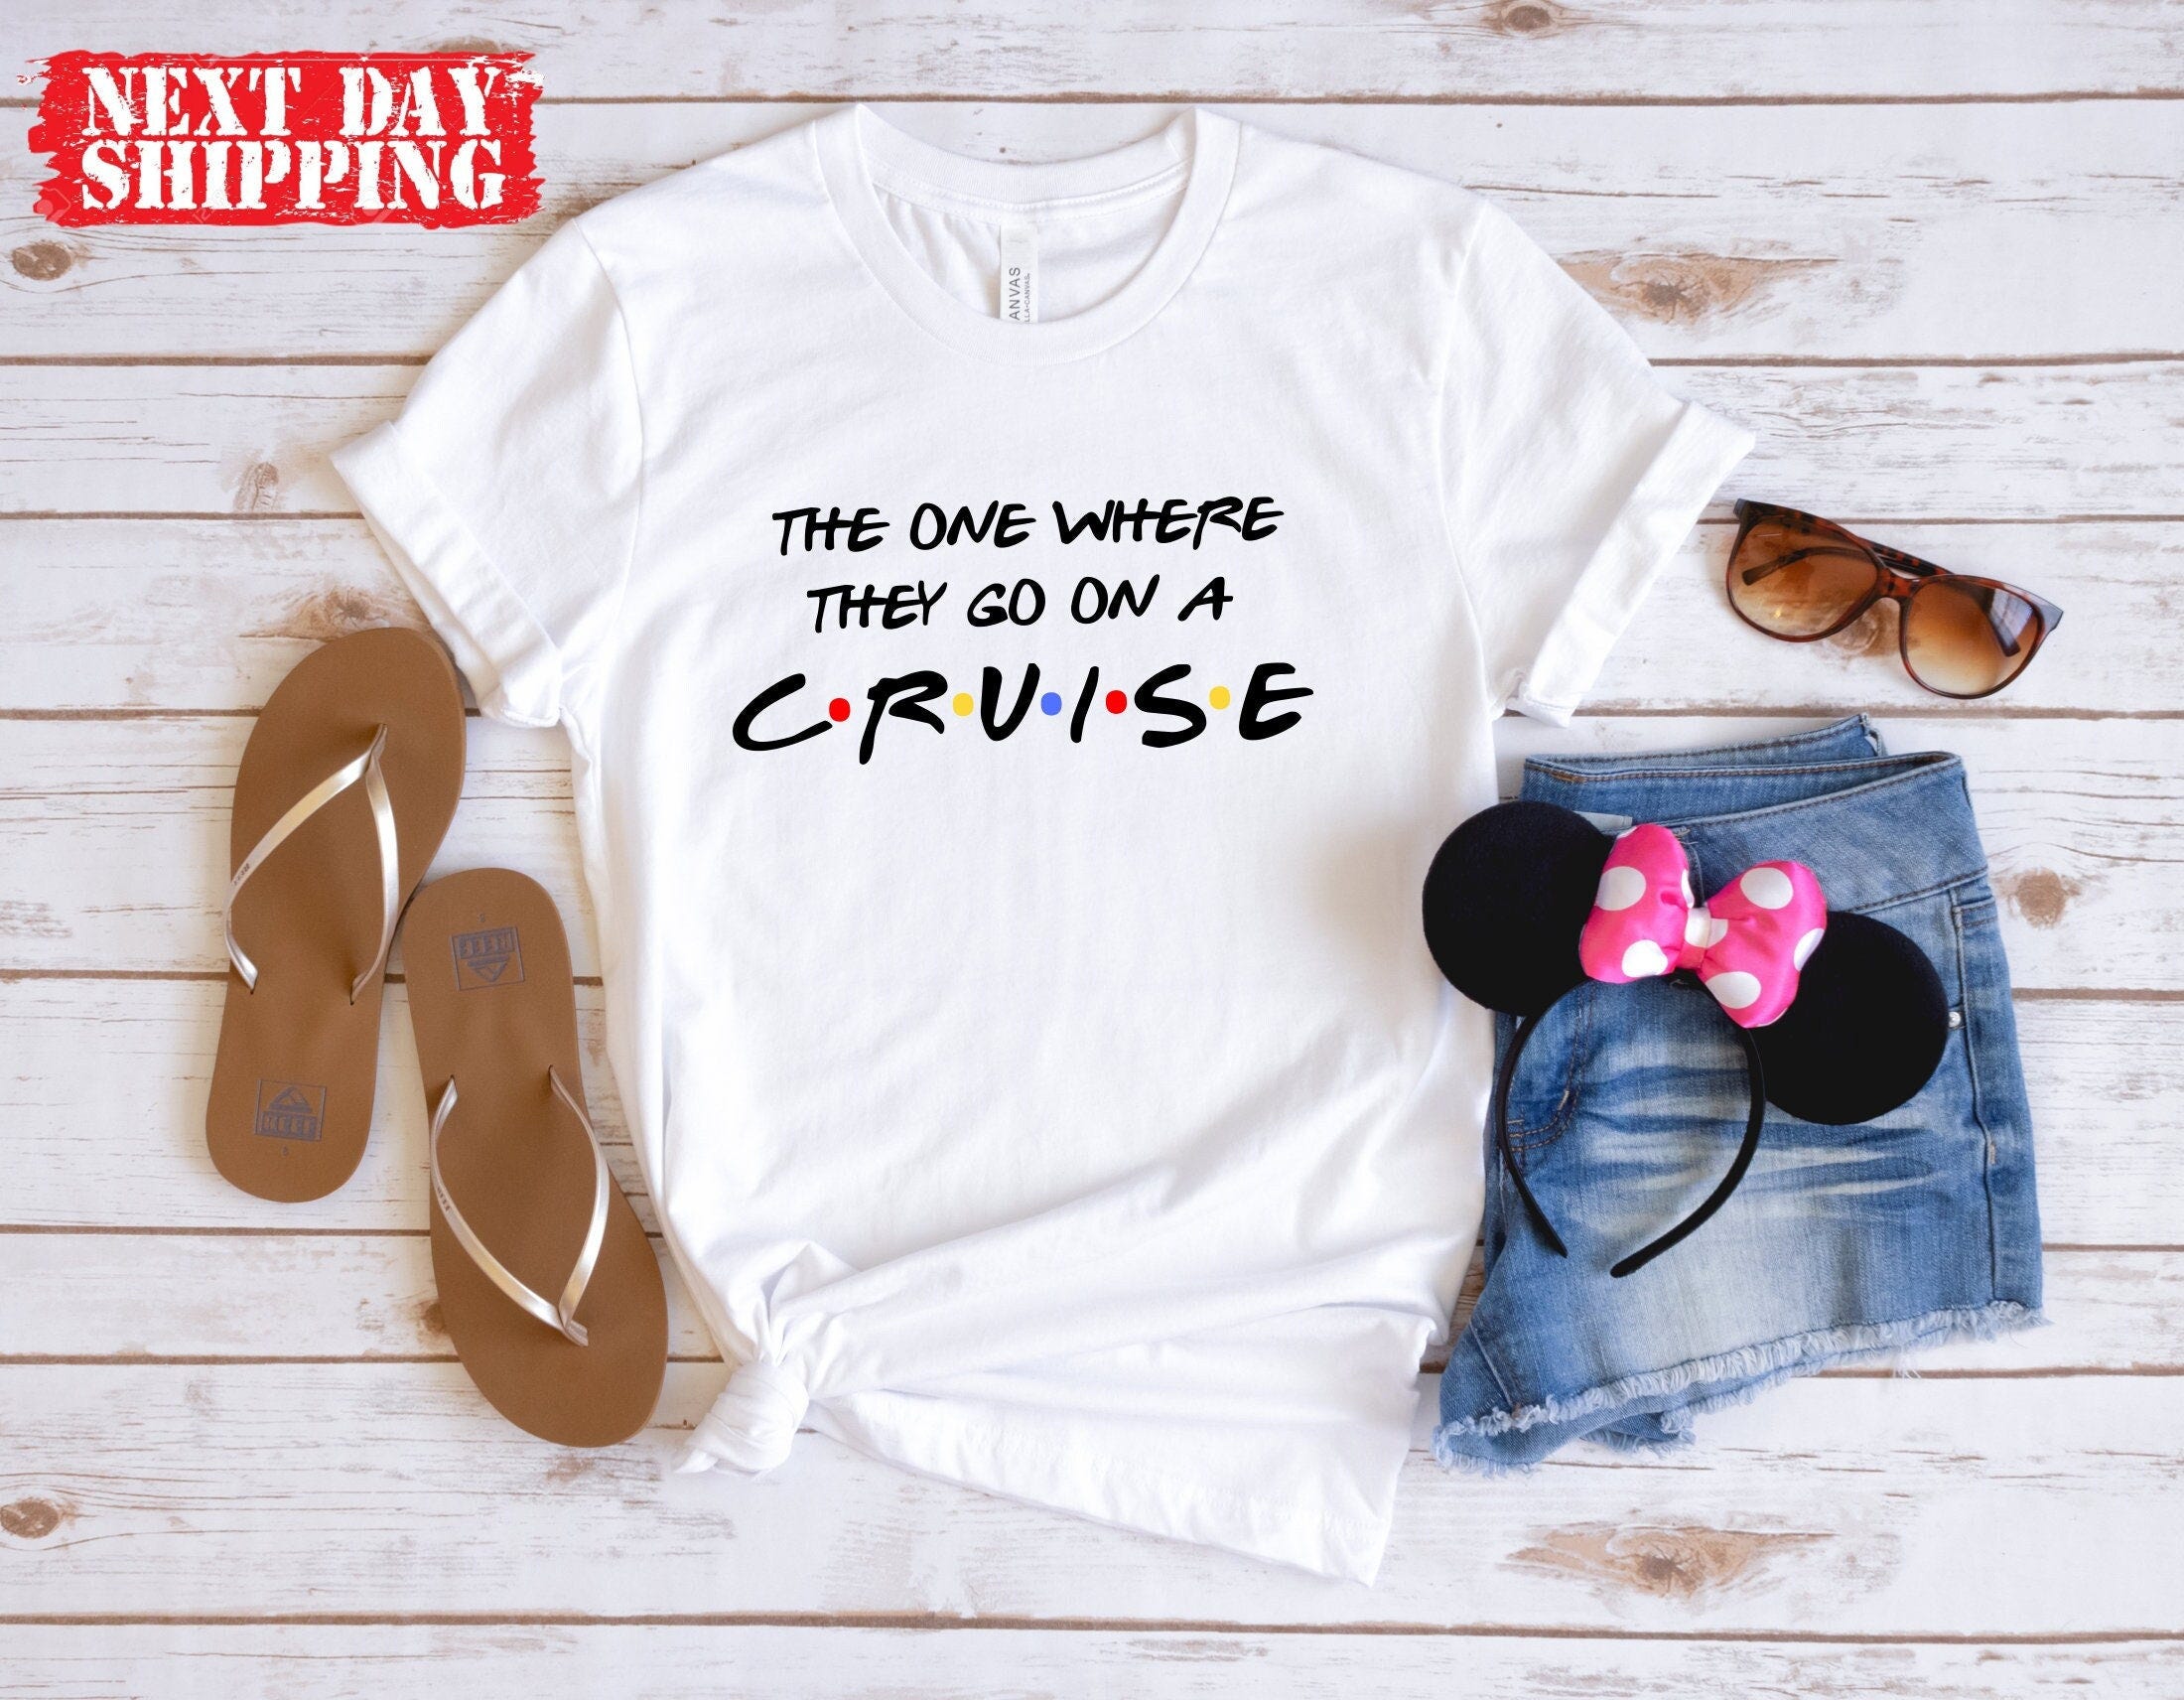 The One Where They Go On A Cruise Shirt, Cruise Shirt, Cruise Lovers T-shirt, Family Vacation Shirts, Cruise Ship Travel Shirt, Gift For Her